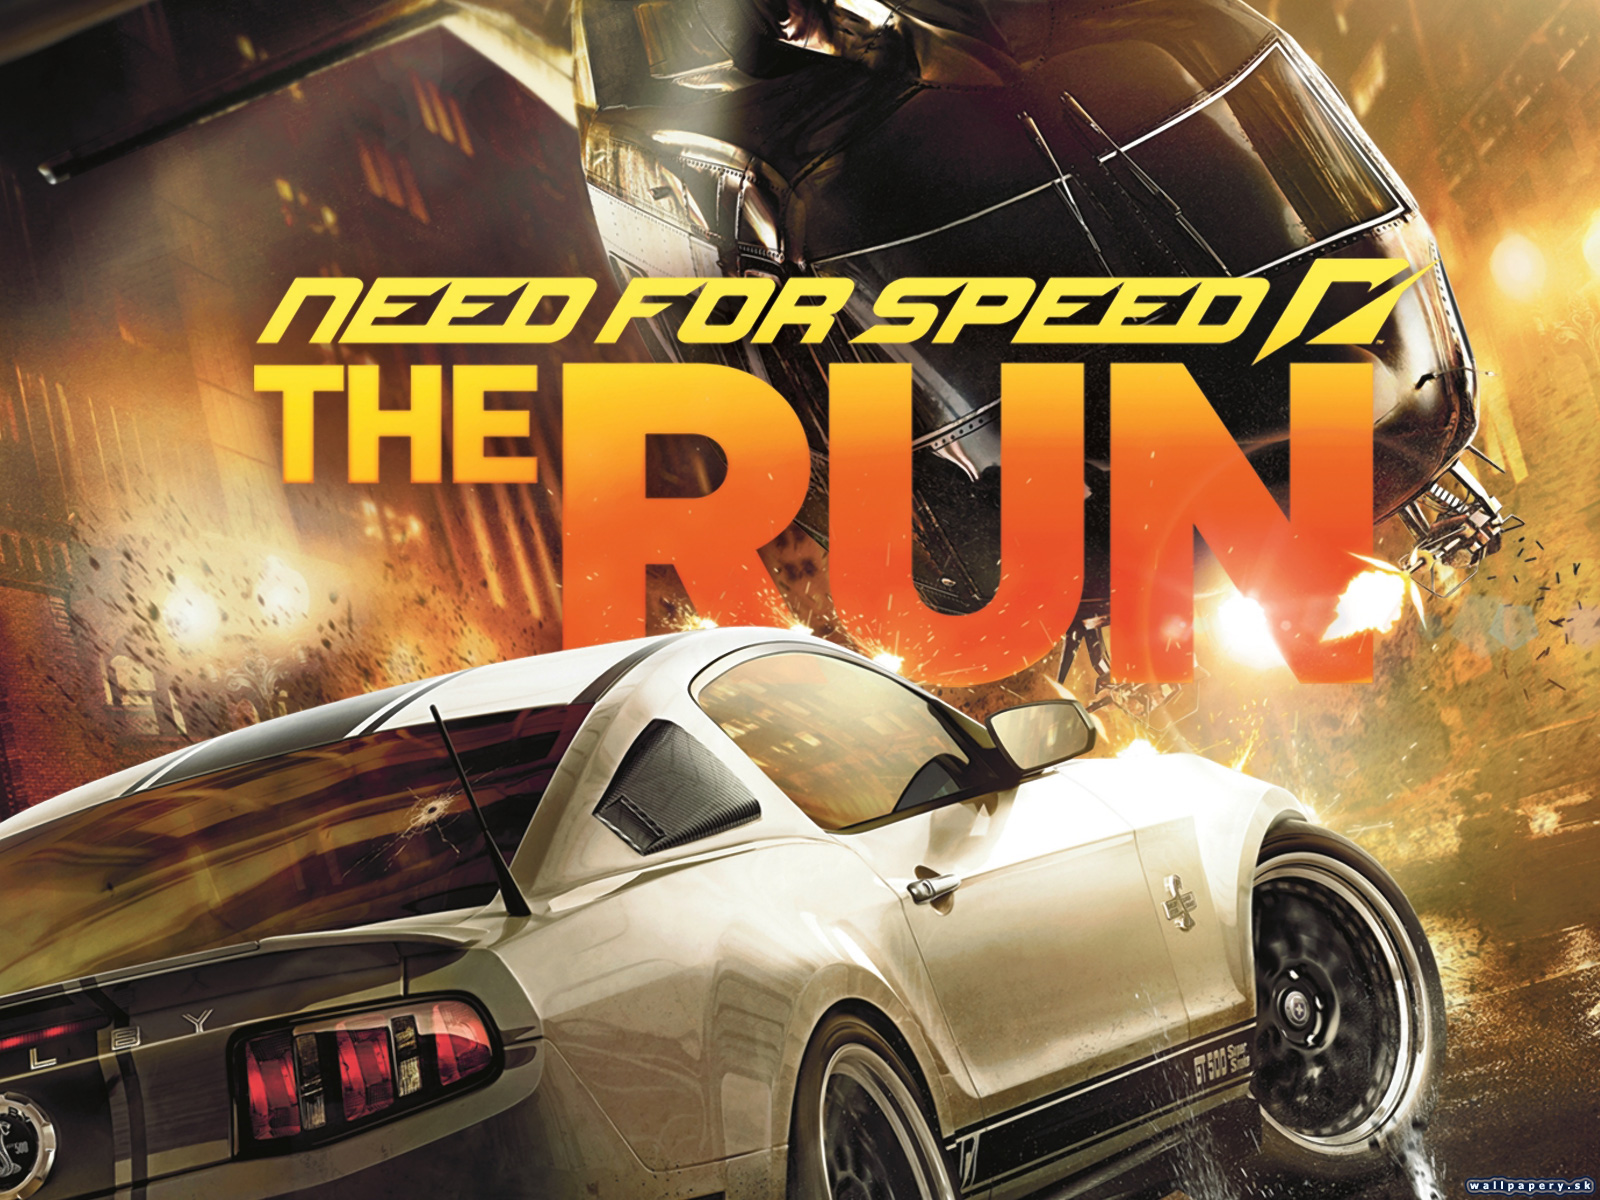 Need for Speed: The Run - wallpaper 1